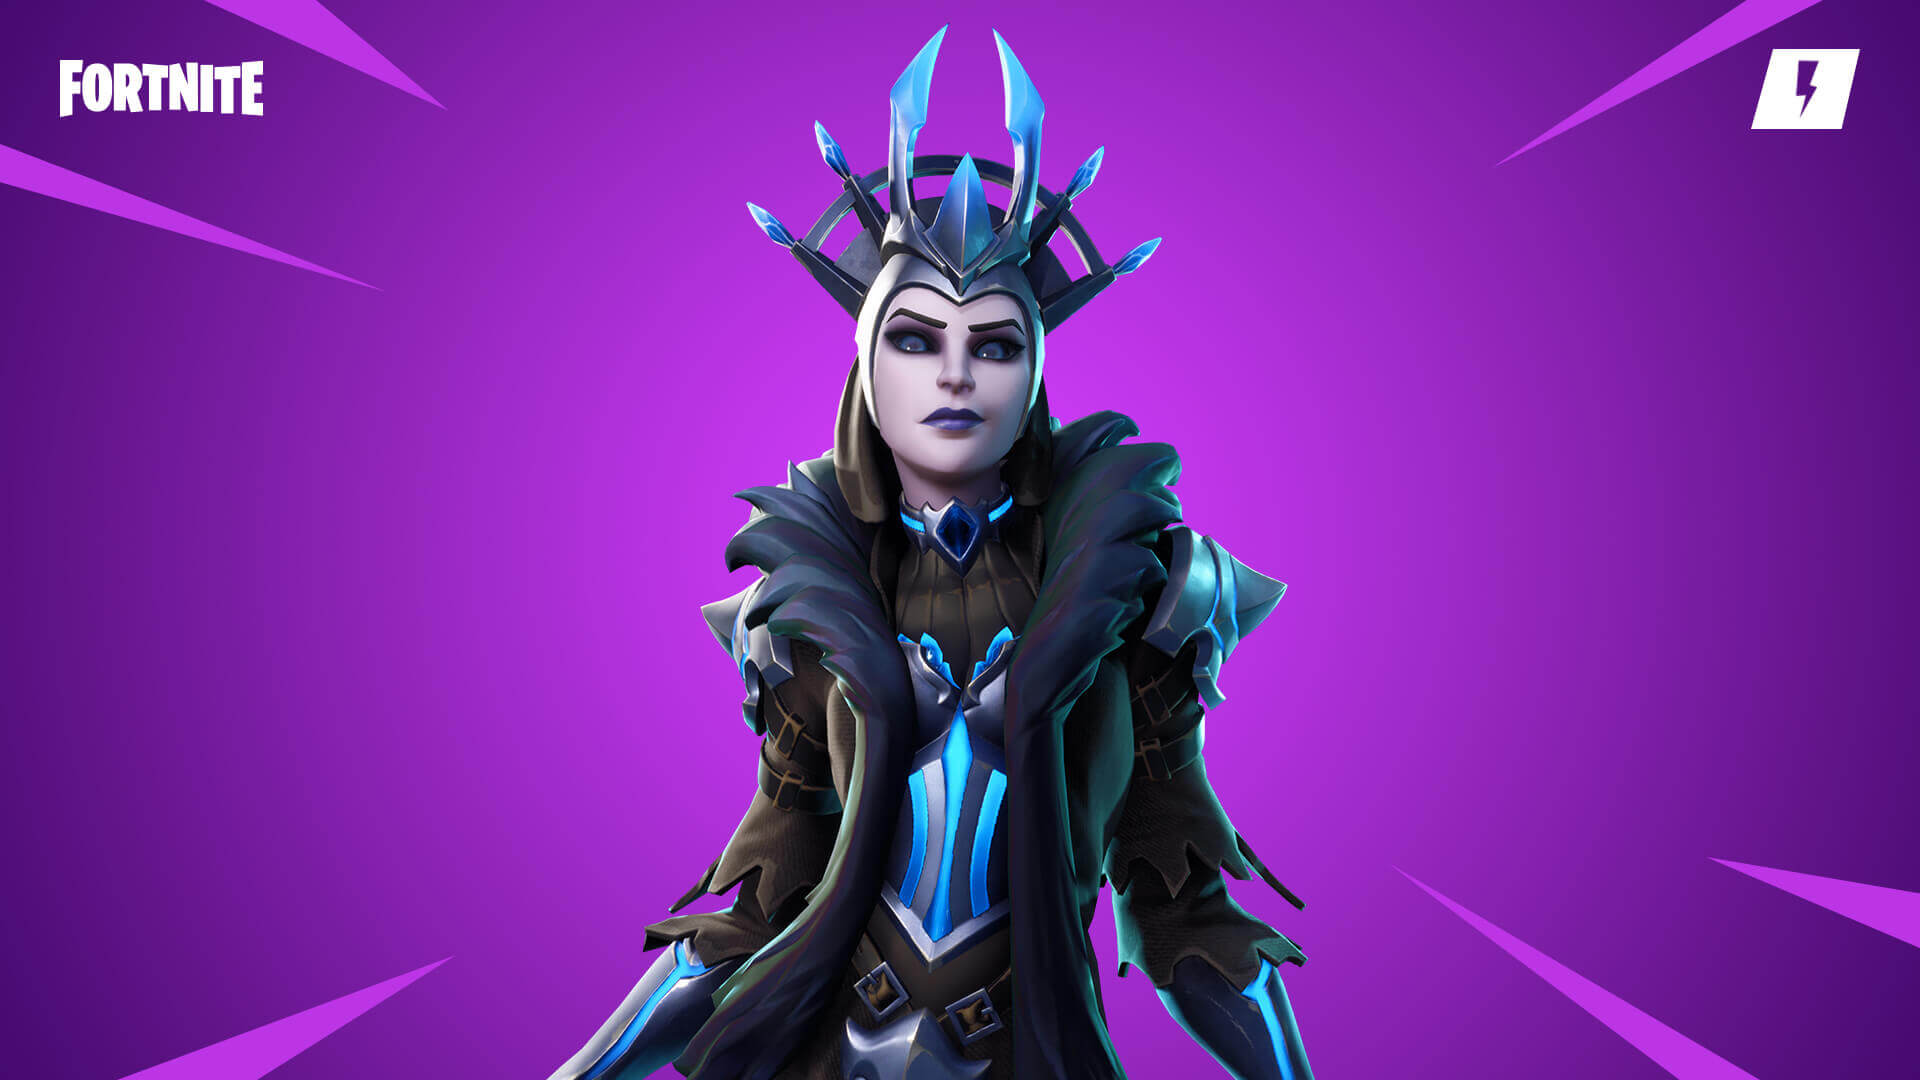 Patch Notes for Save the World v23.10 - Frostnite Challenges, Winterfest Questlines and more